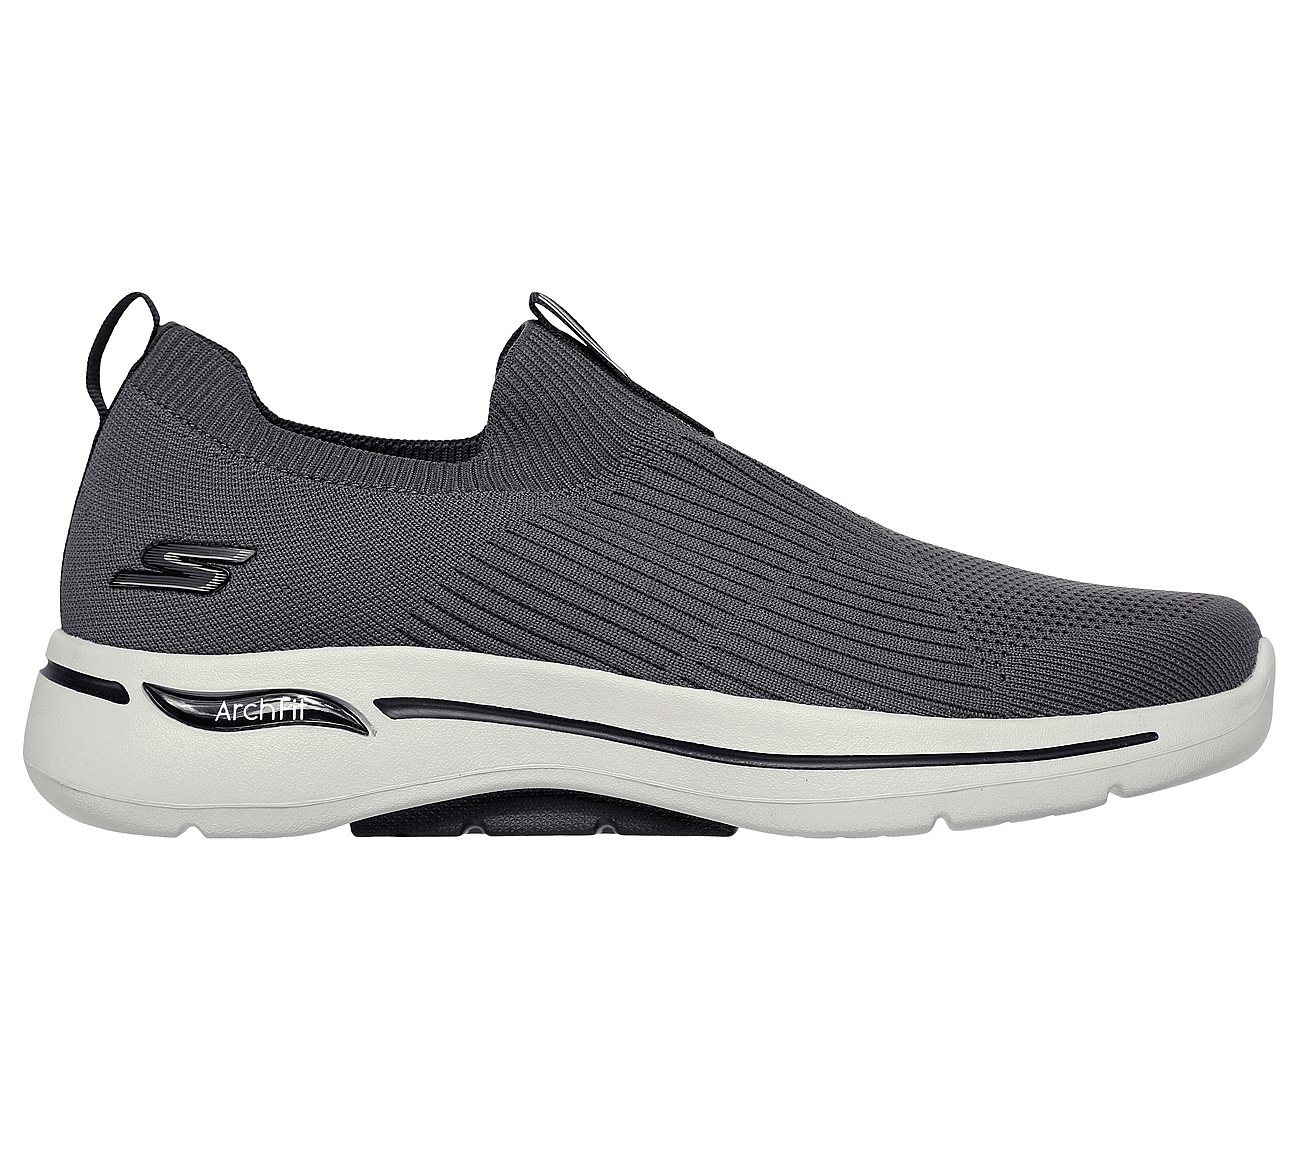 Skechers Charcoal/Black Go Walk Arch Fit Iconic Mens Walking Shoes ...